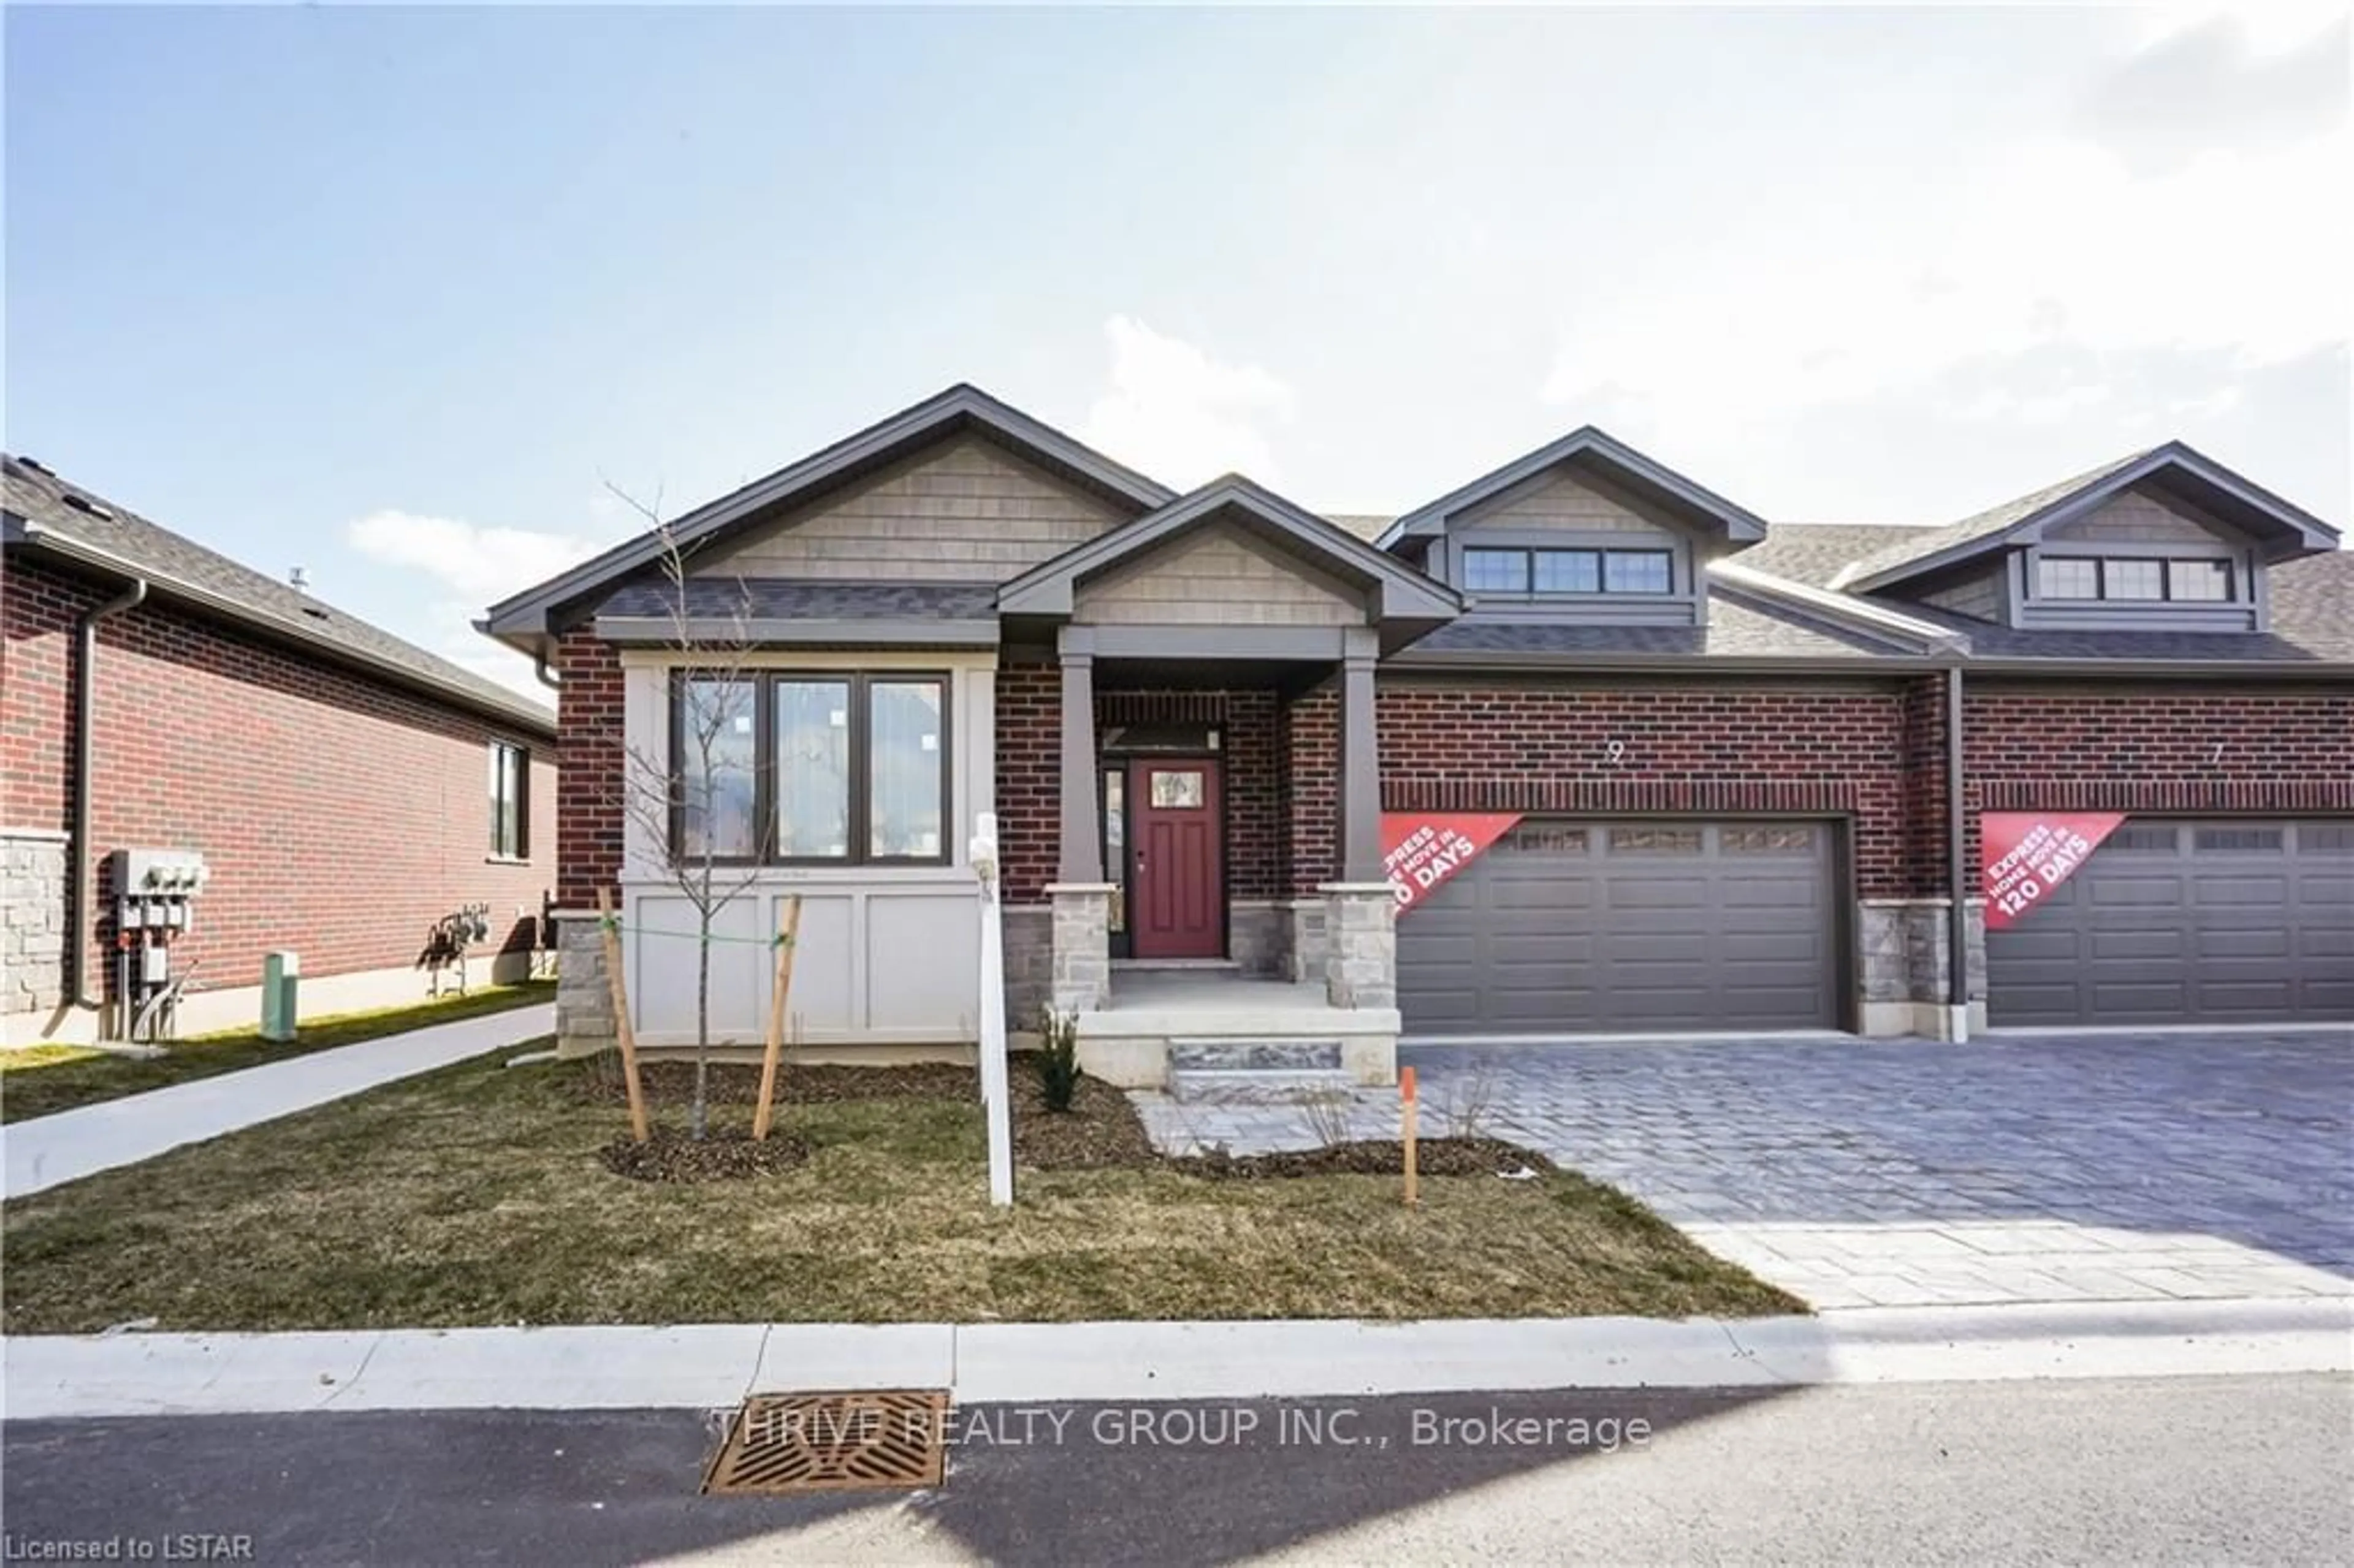 Home with brick exterior material for 1080 Upperpoint Ave #9, London Ontario N6K 4M9